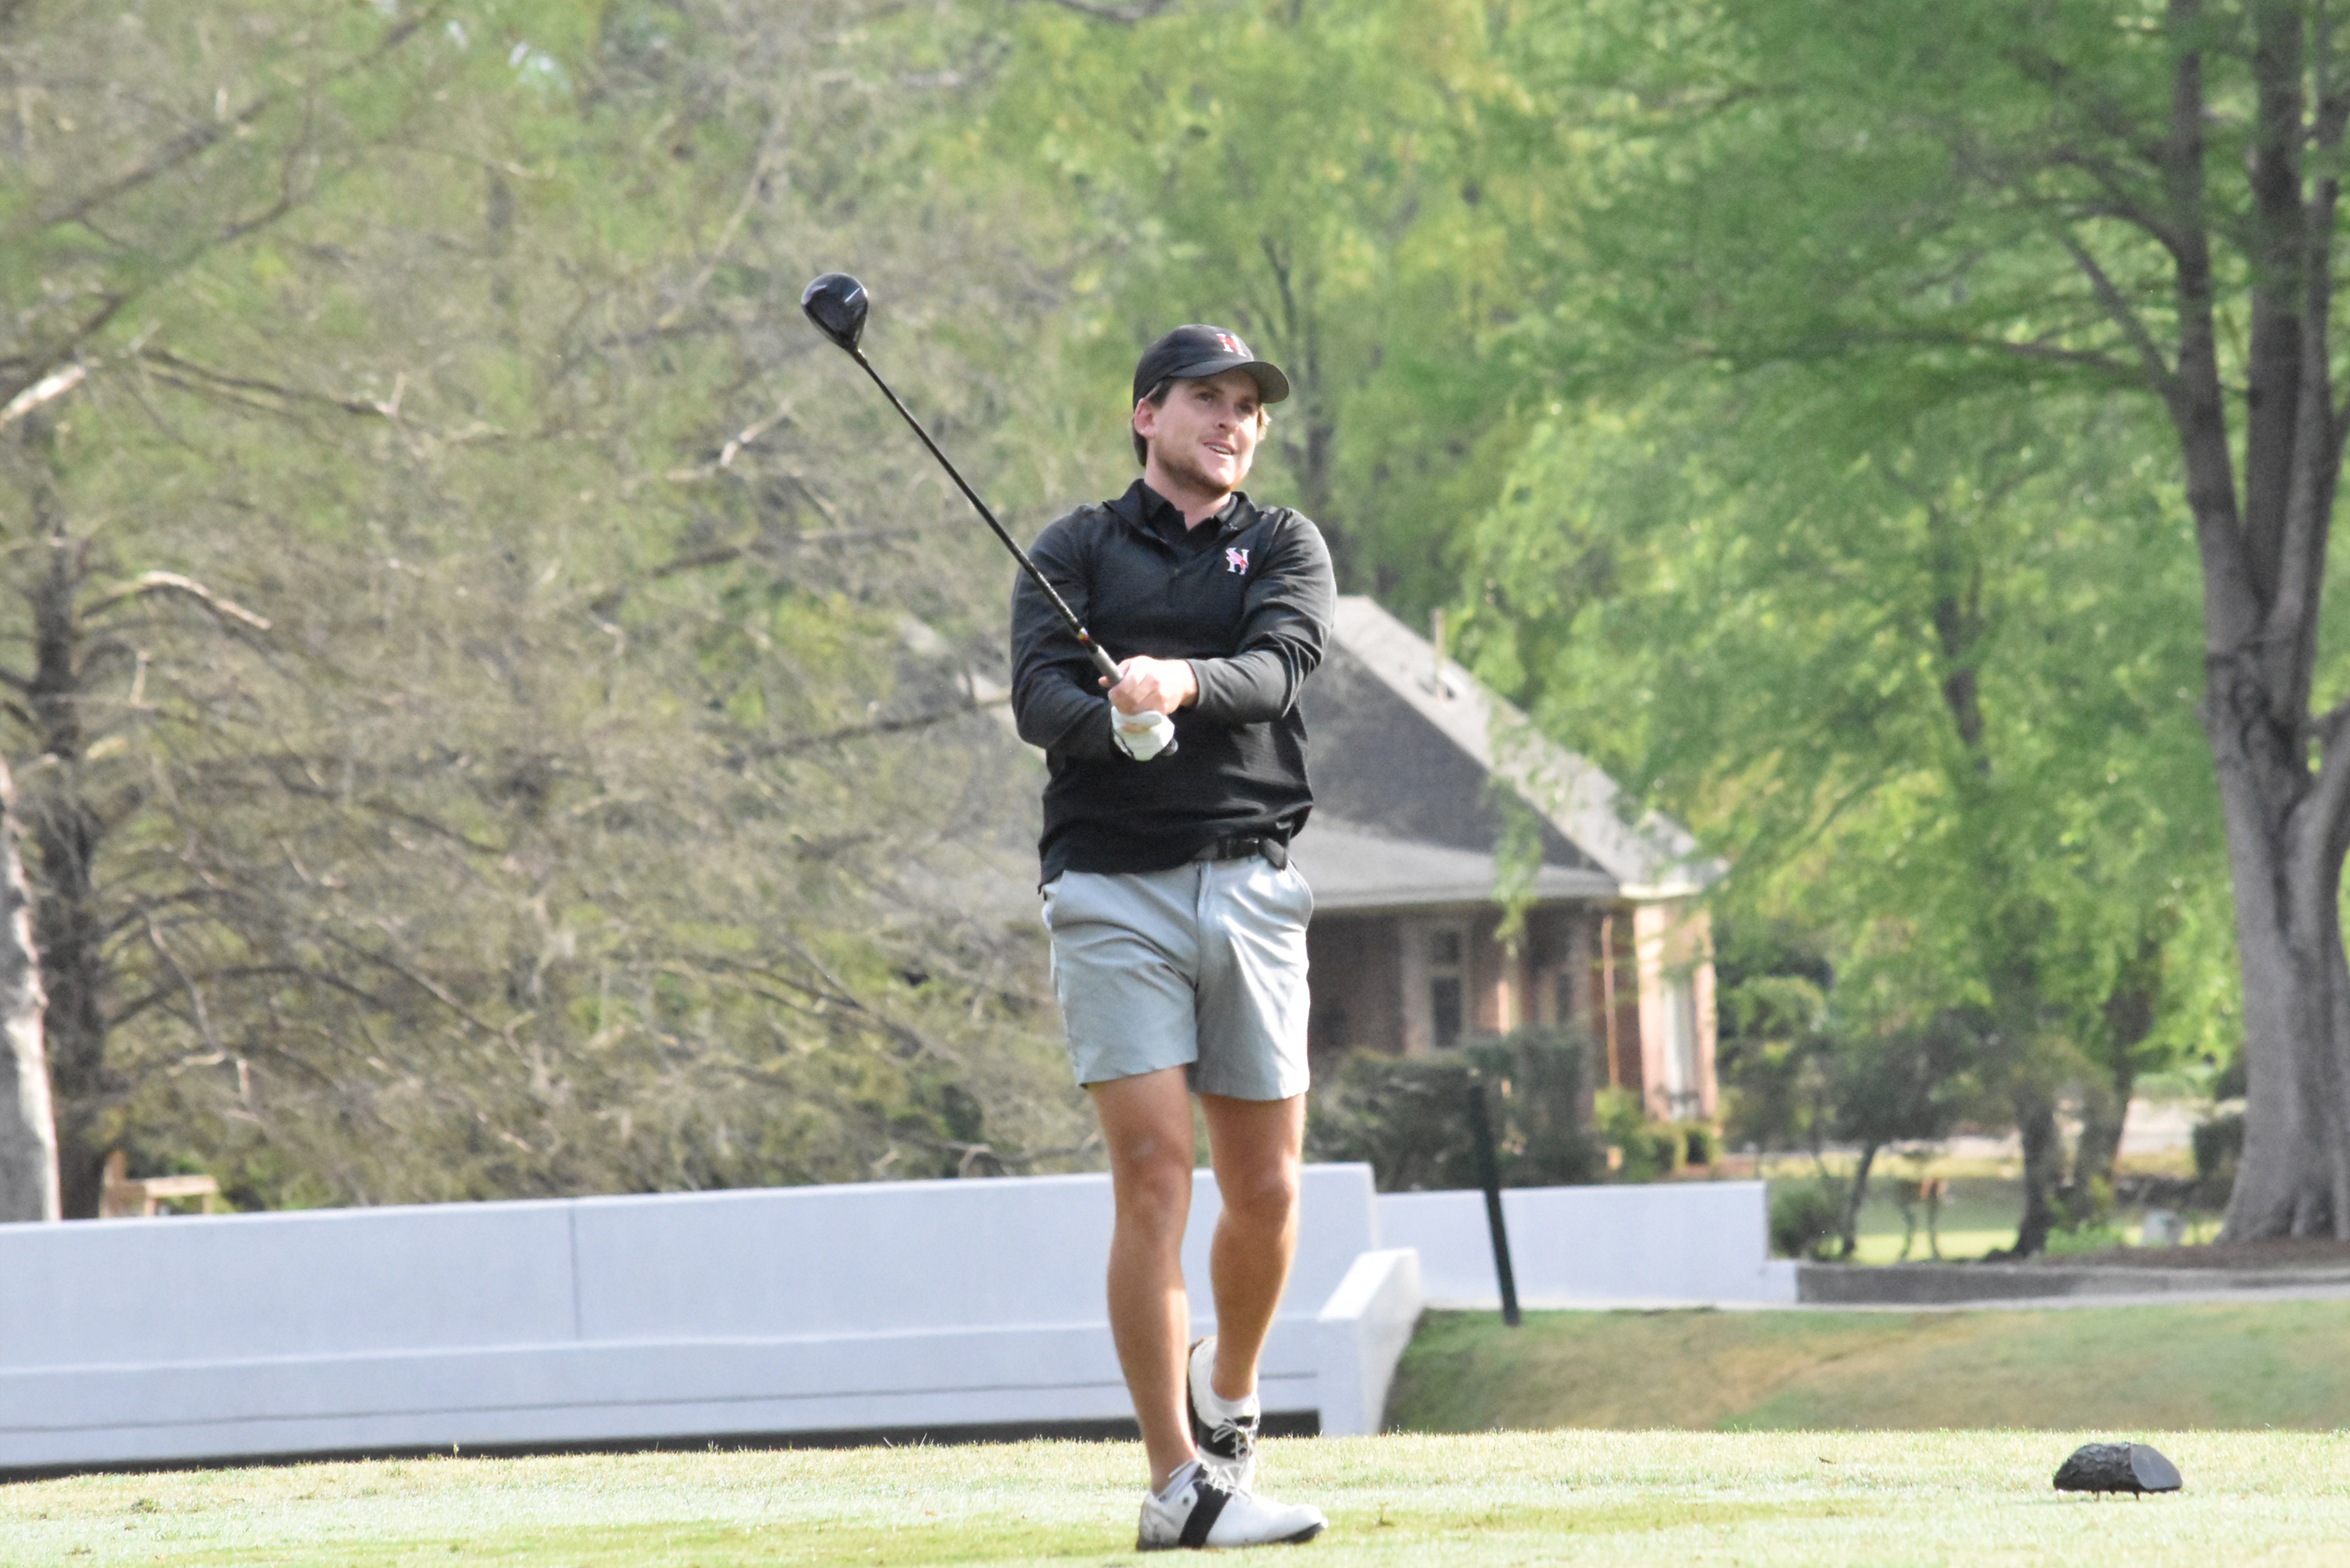 Hawks Currently Sit in Seventh at Florence Intercollegiate